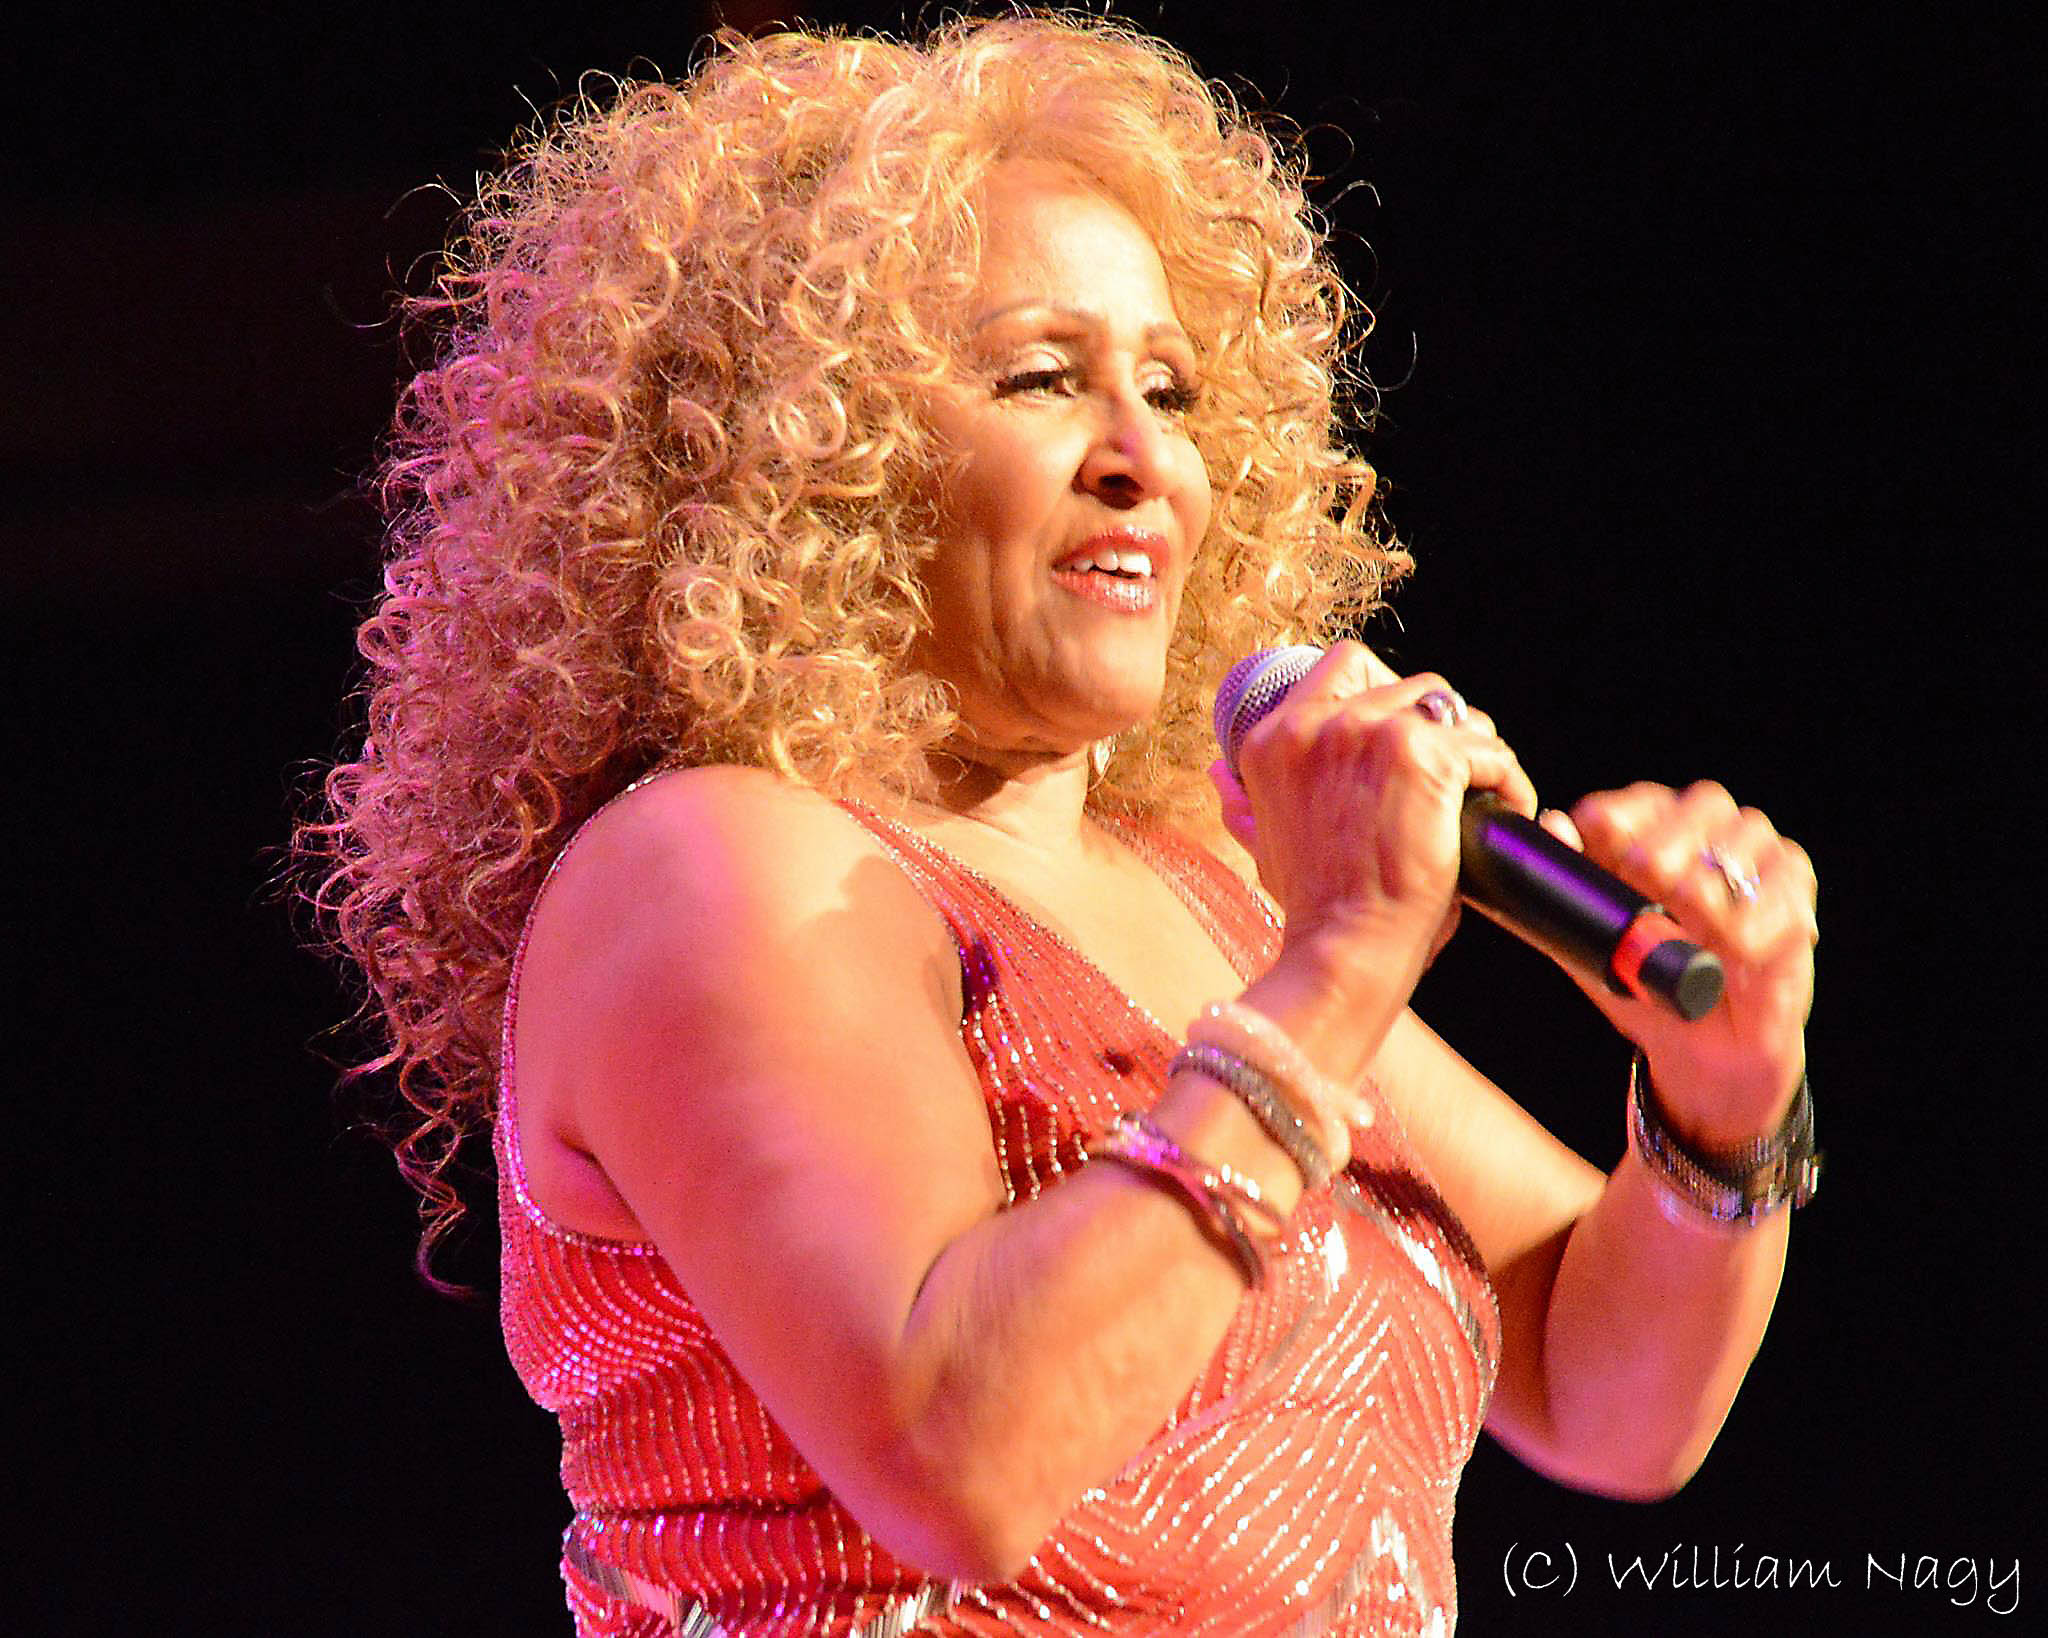 What band was Darlene Love in?